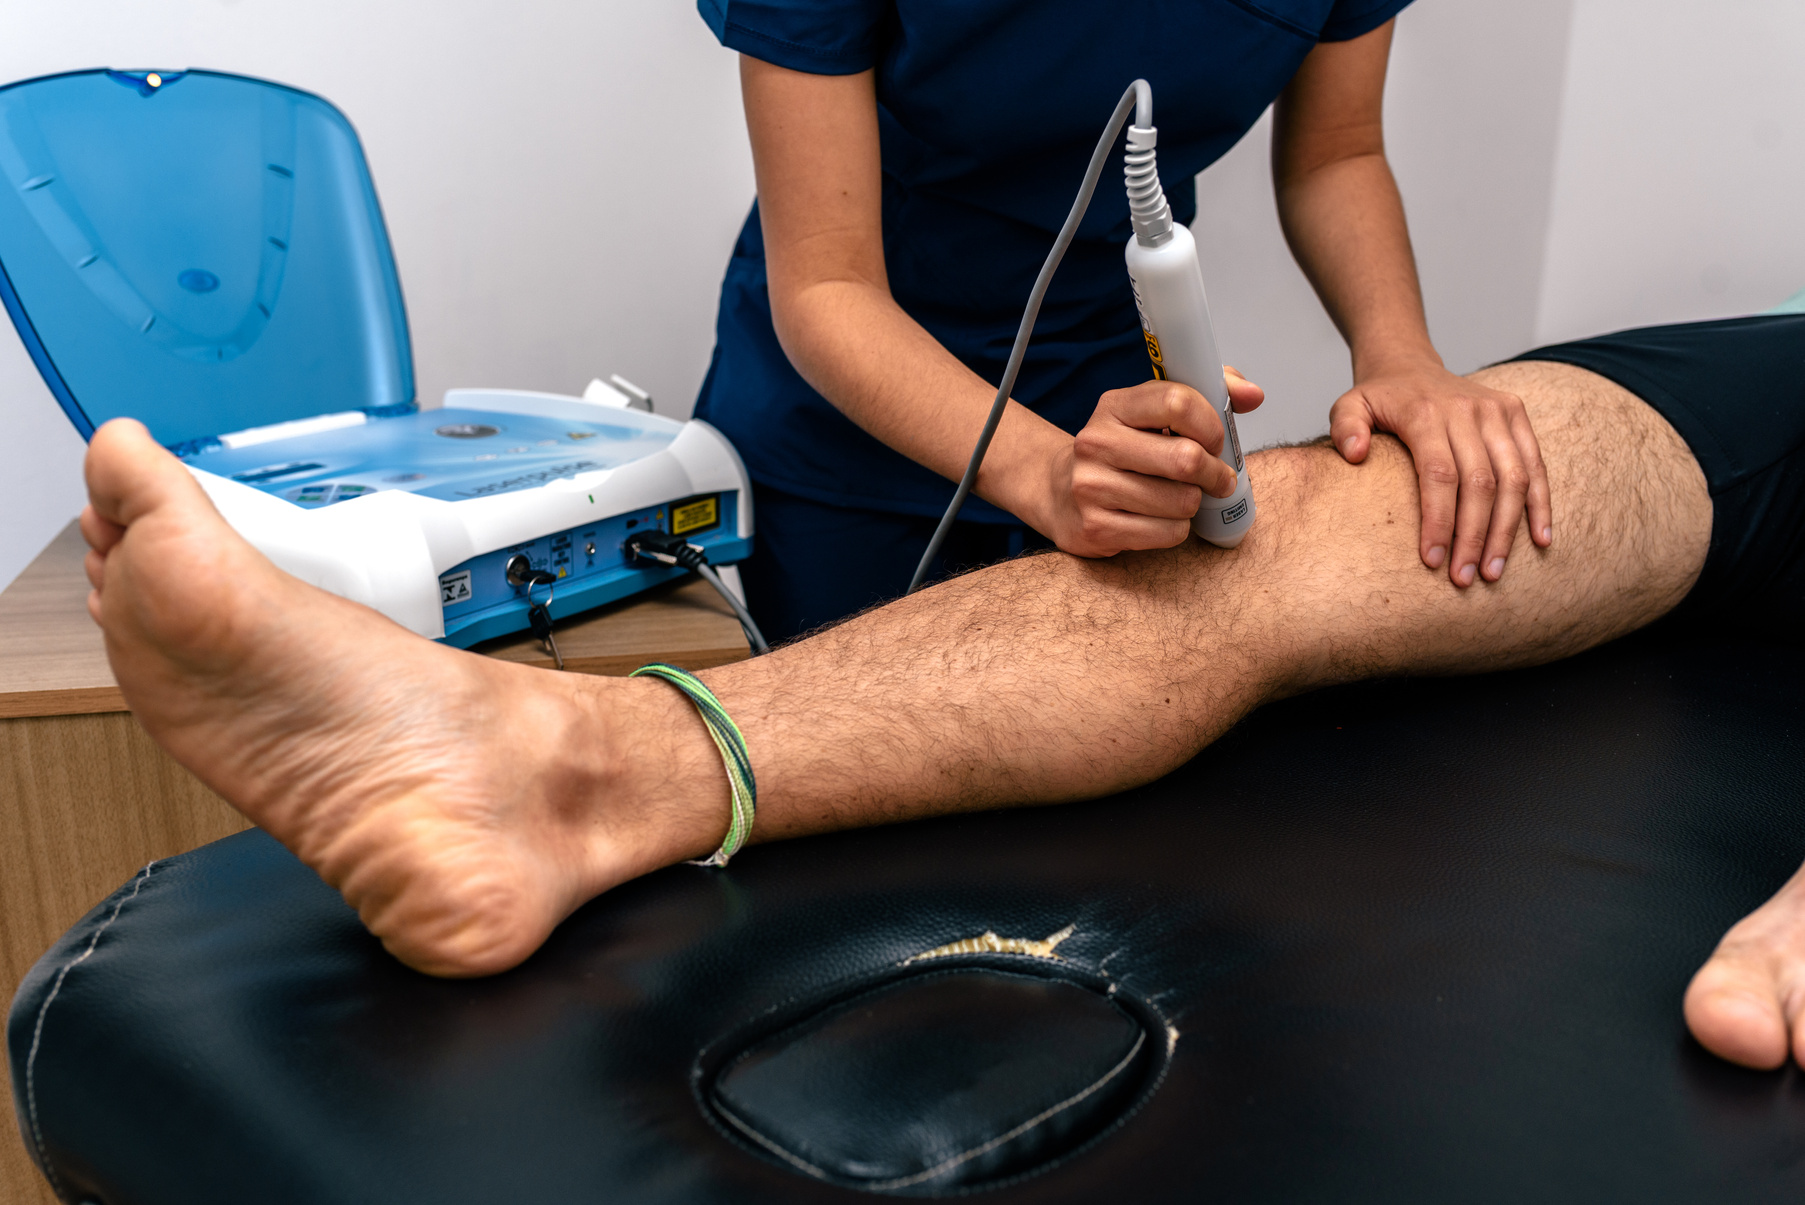 Ultrasonic treatment in Physiotherapy Clinic